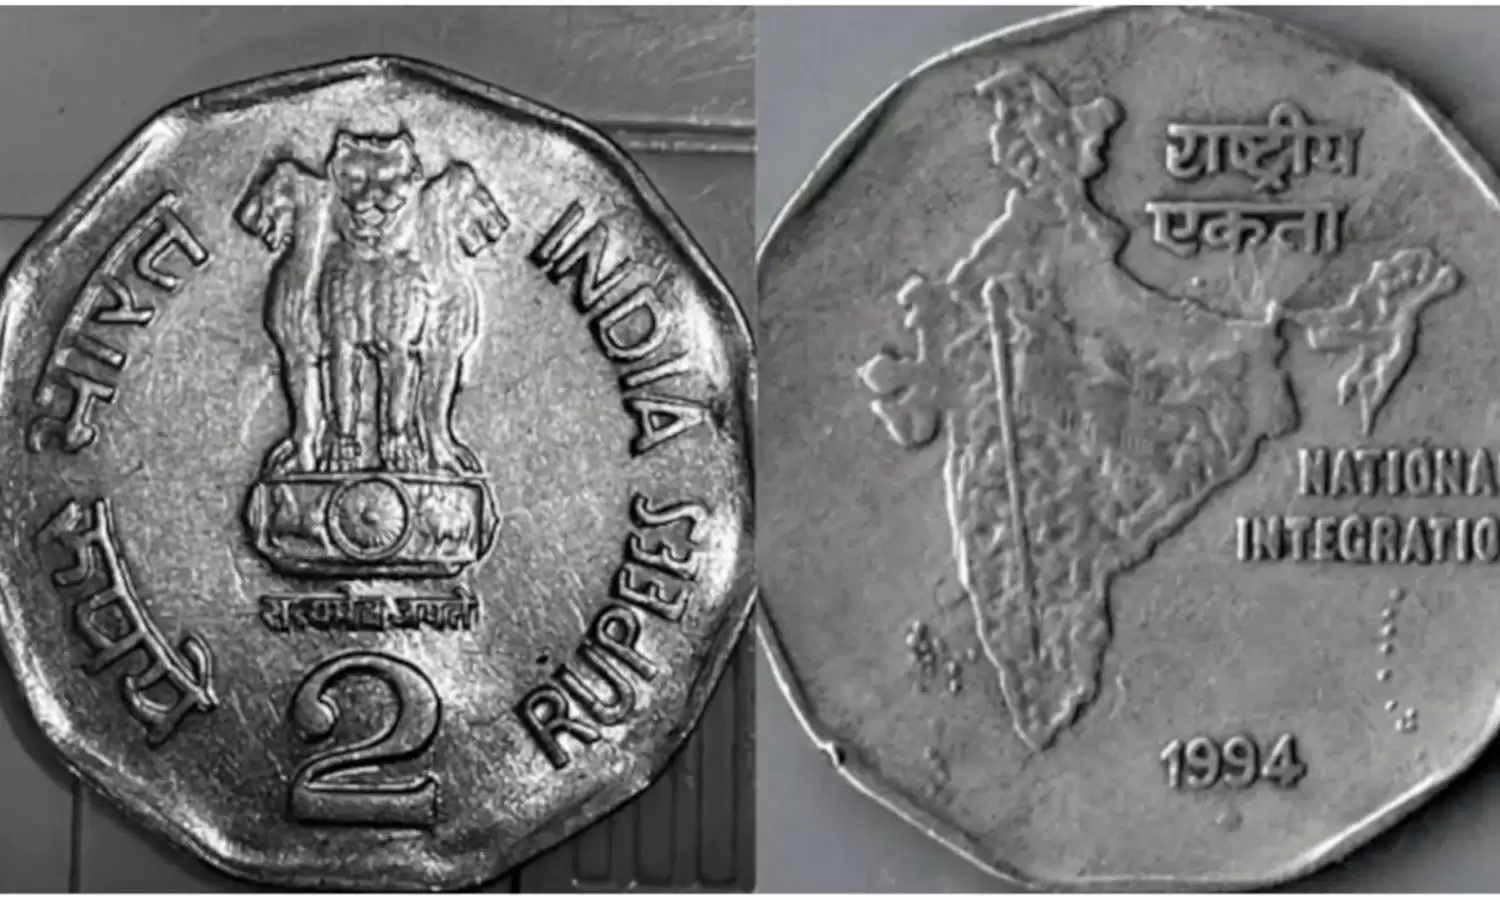 Old 2 rupee coin